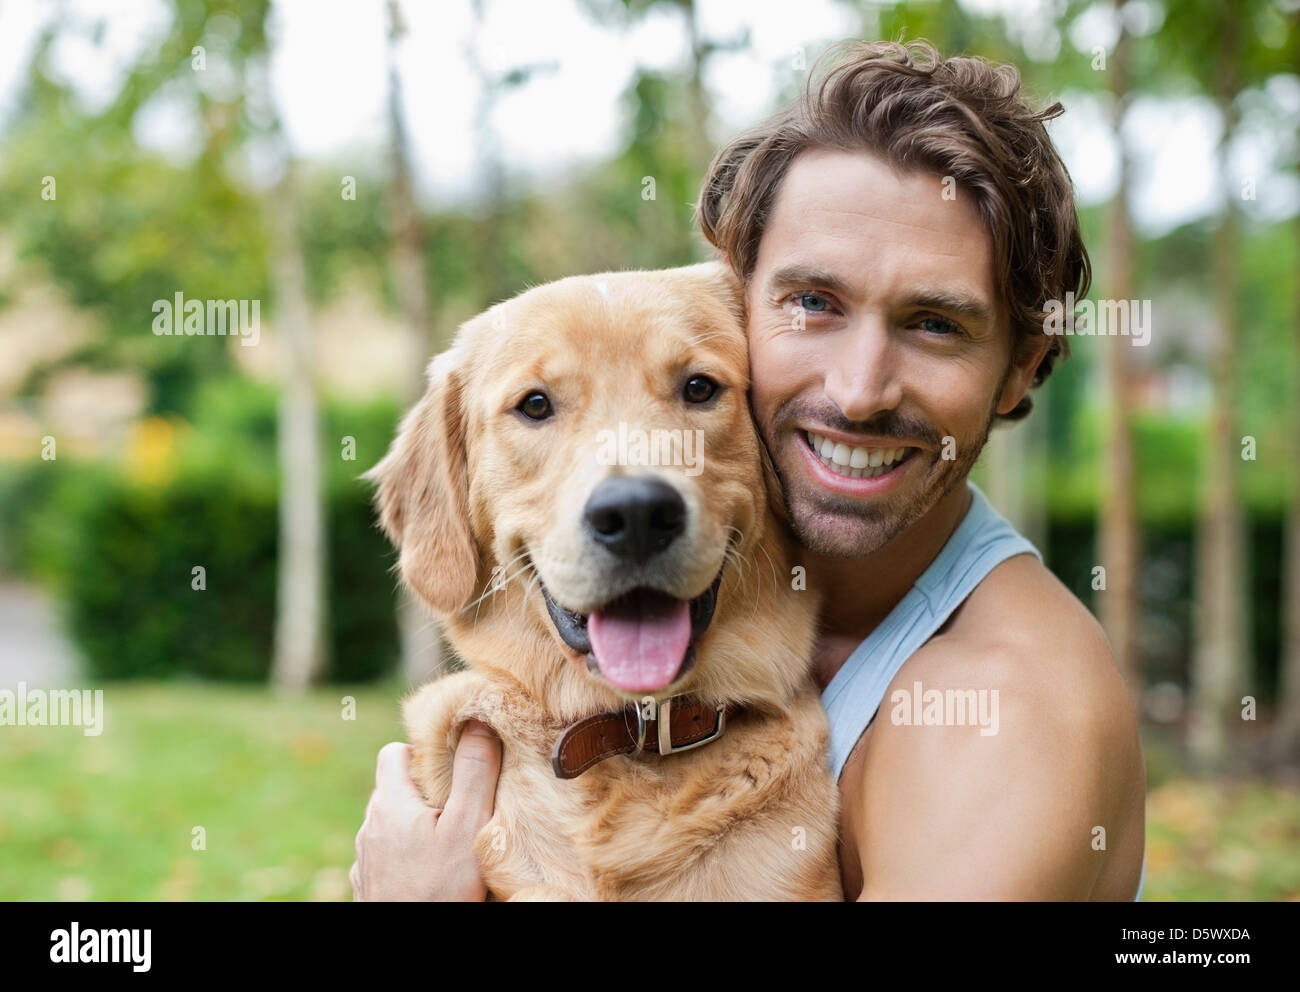 Smiling man petting dog outdoors Banque D'Images